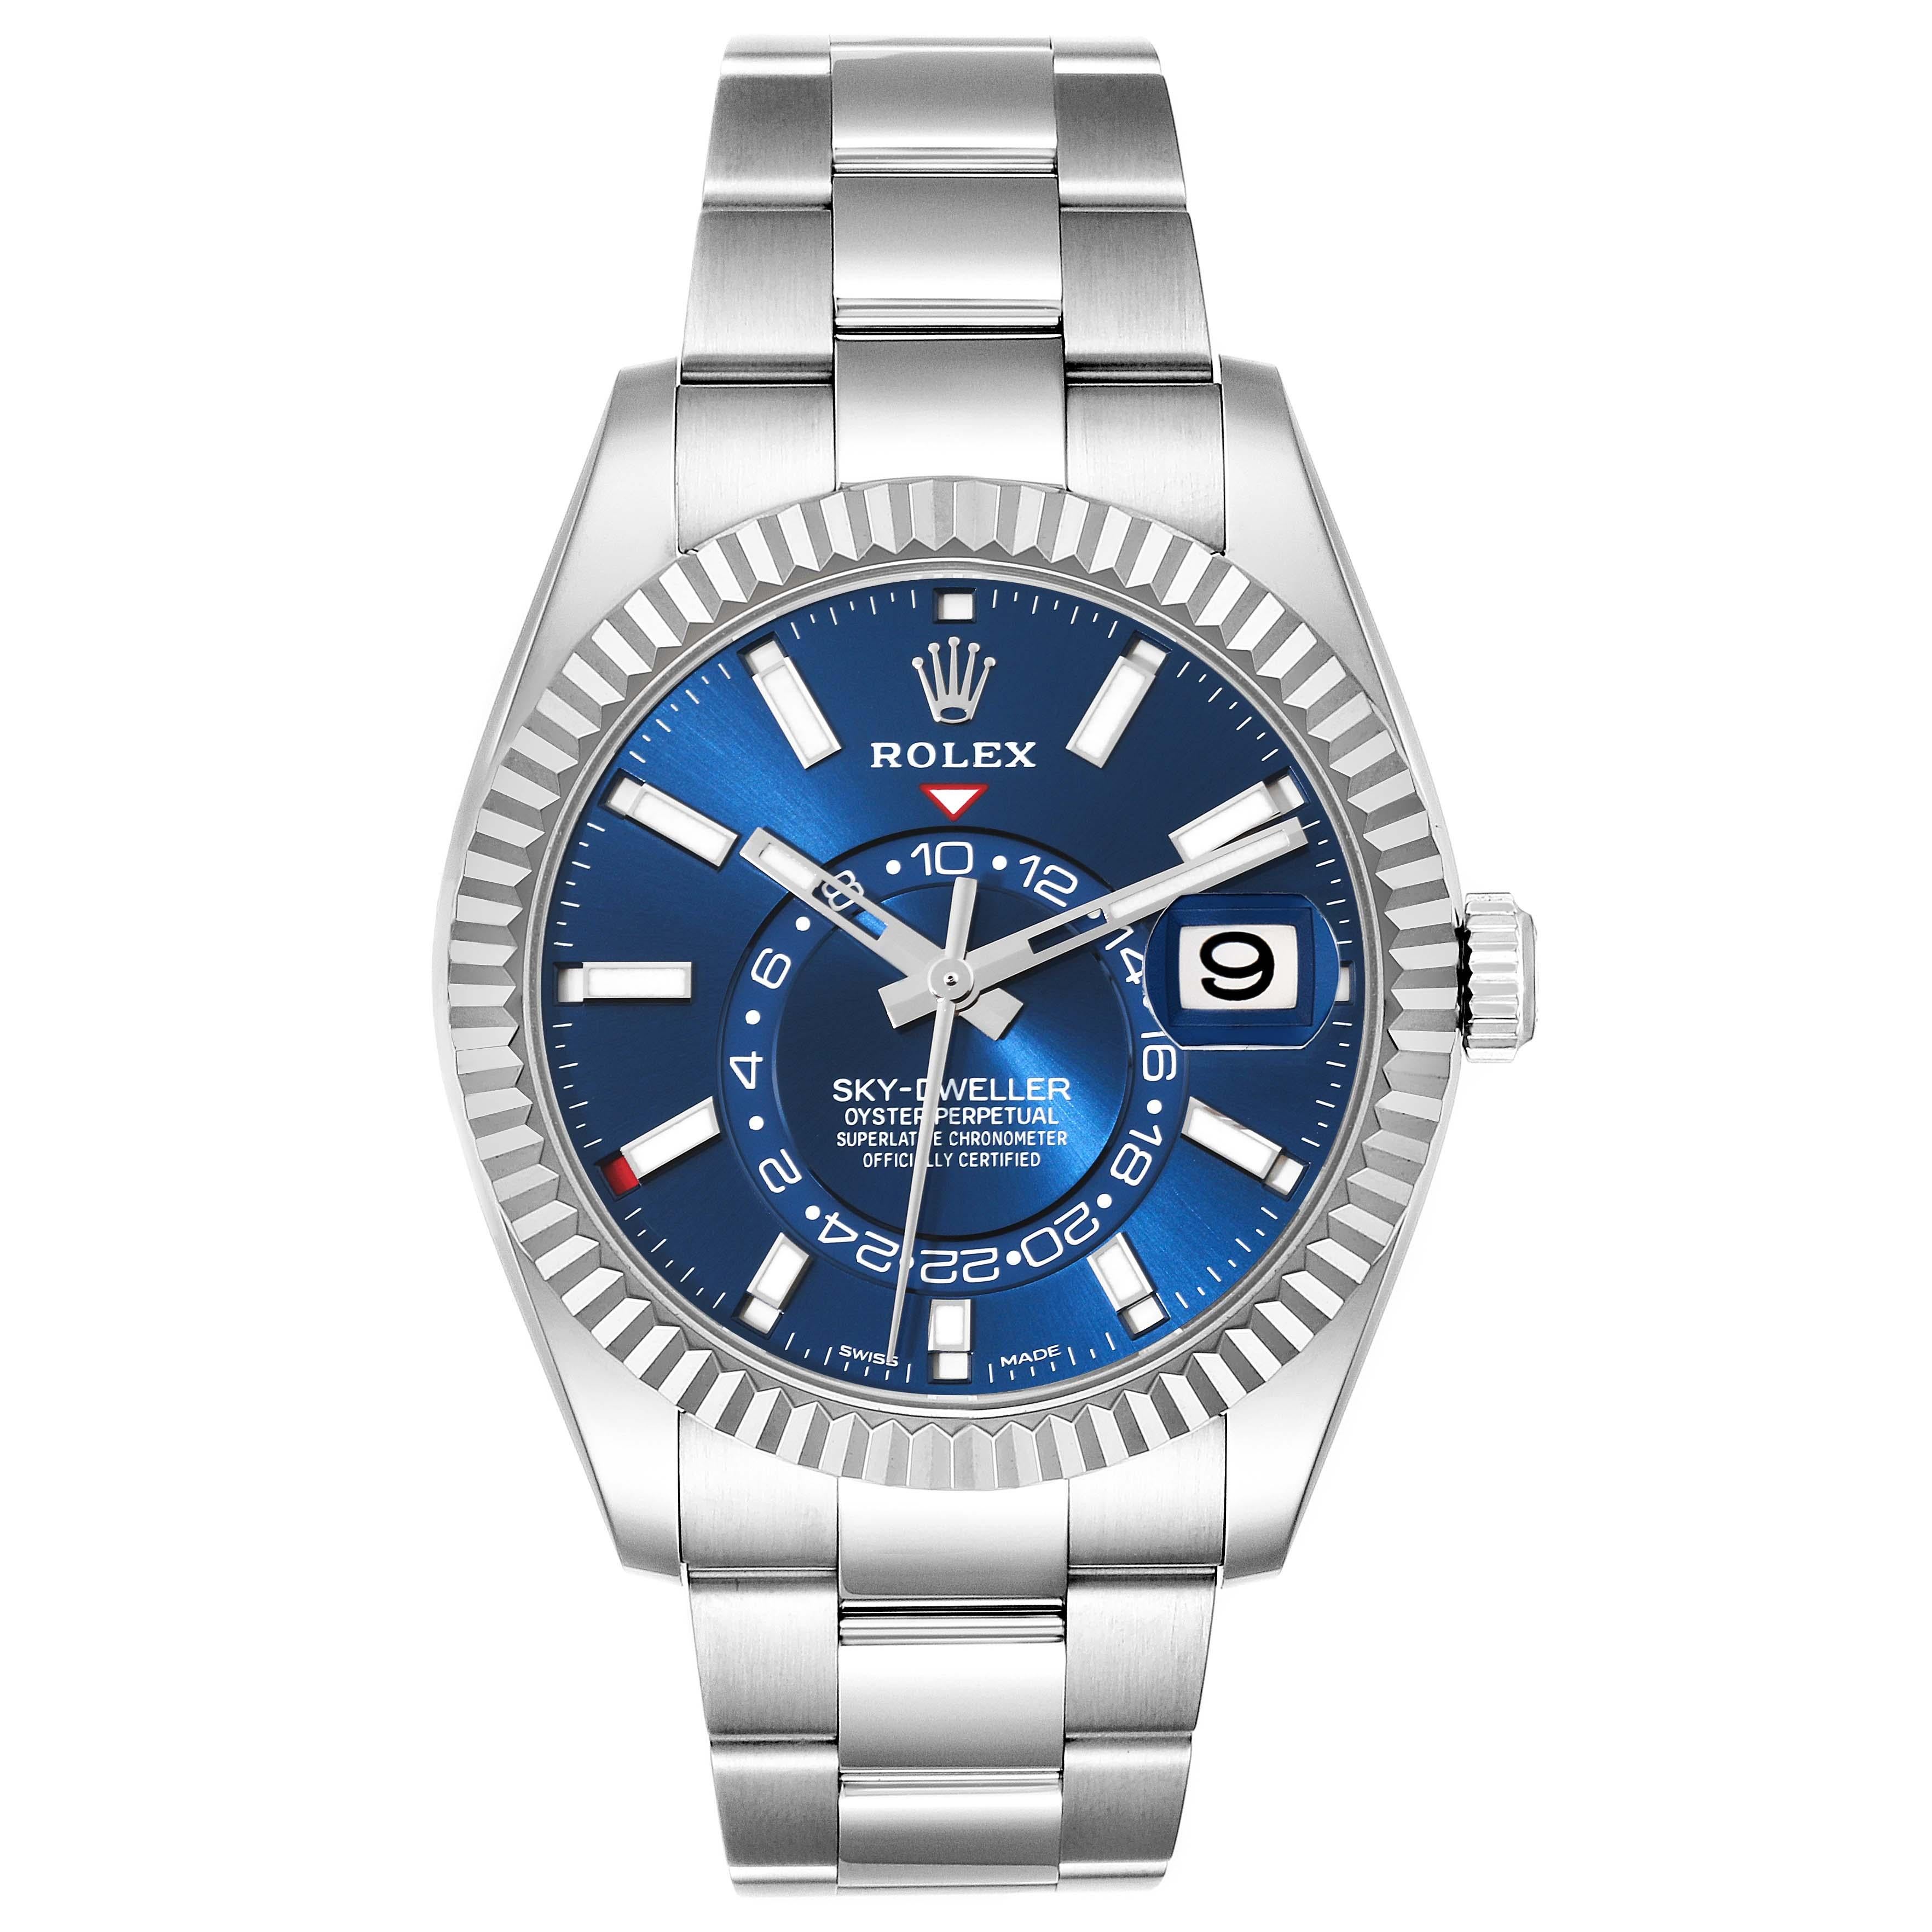 Rolex Sky-Dweller Steel White Gold Blue Dial Mens Watch 326934 Unworn. Officially certified chronometer self-winding movement. Dual time zones, annual calendar. Paramagnetic blue Parachrom hairspring. High-performance Paraflex shock absorbers.